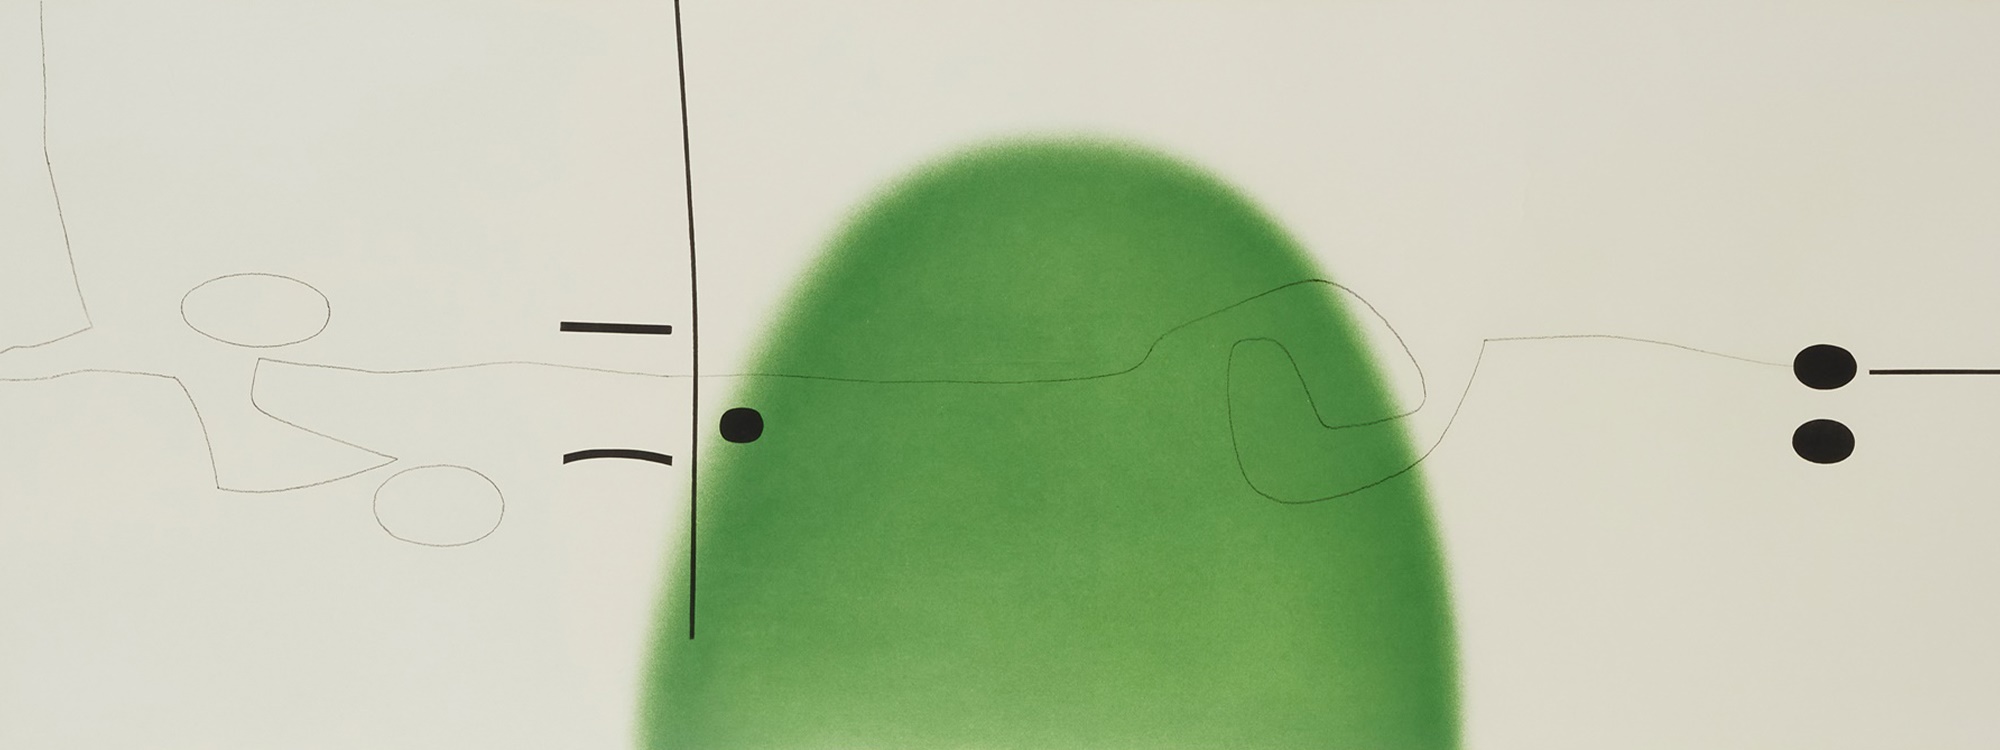 VICTOR PASMORE C.B.E., C.H. (BRITISH 1908-1998) WORLD IN SPACE AND TIME II - 1992